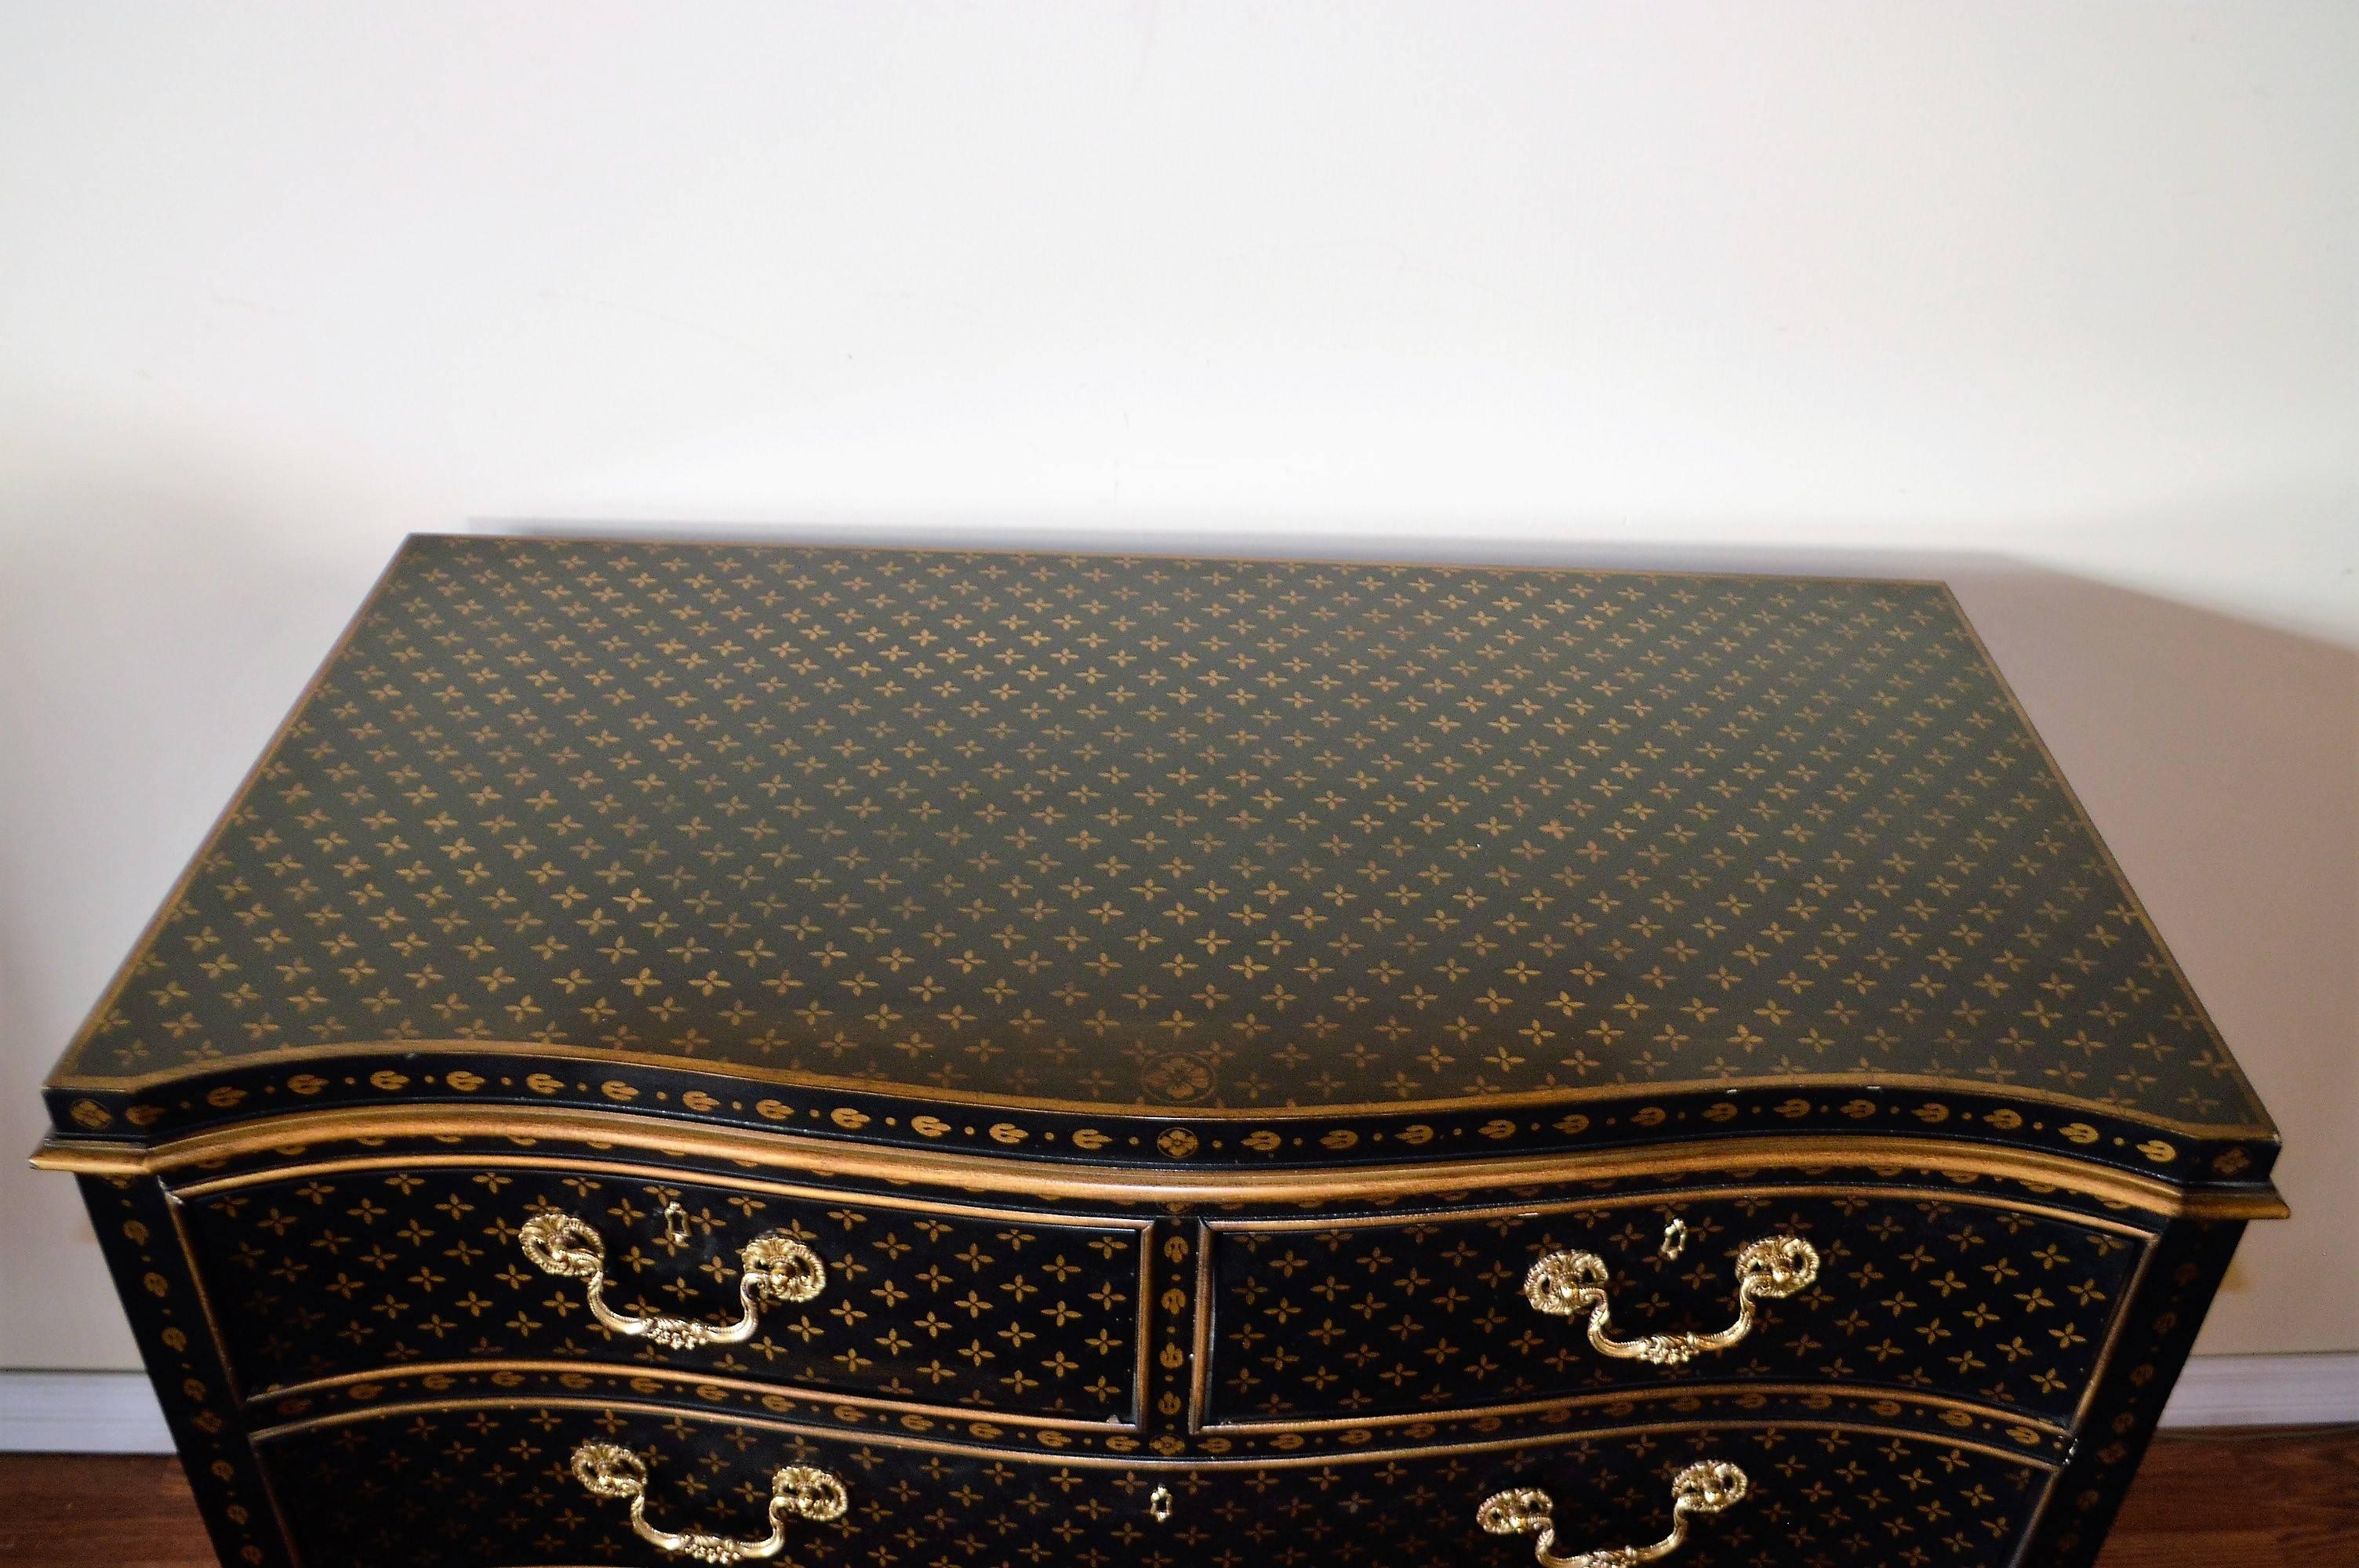 Appliqué Louis Vuitton Inspired Decorative Commode Executed in a Georgian Style